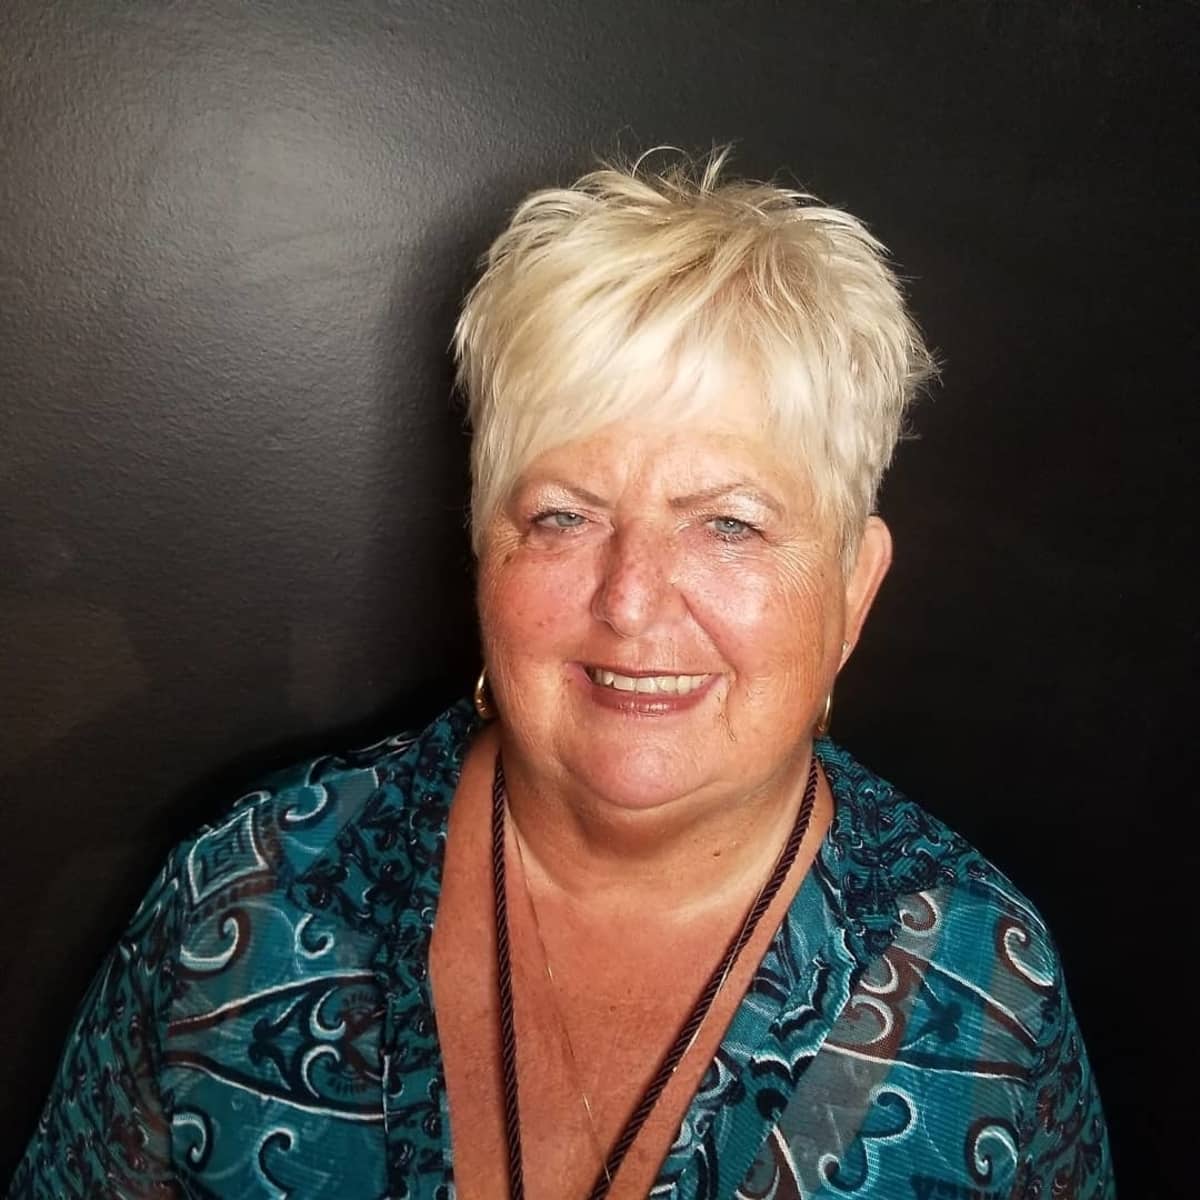 asymmetrical short cut thats messy and spiky for women over 60 with round faces